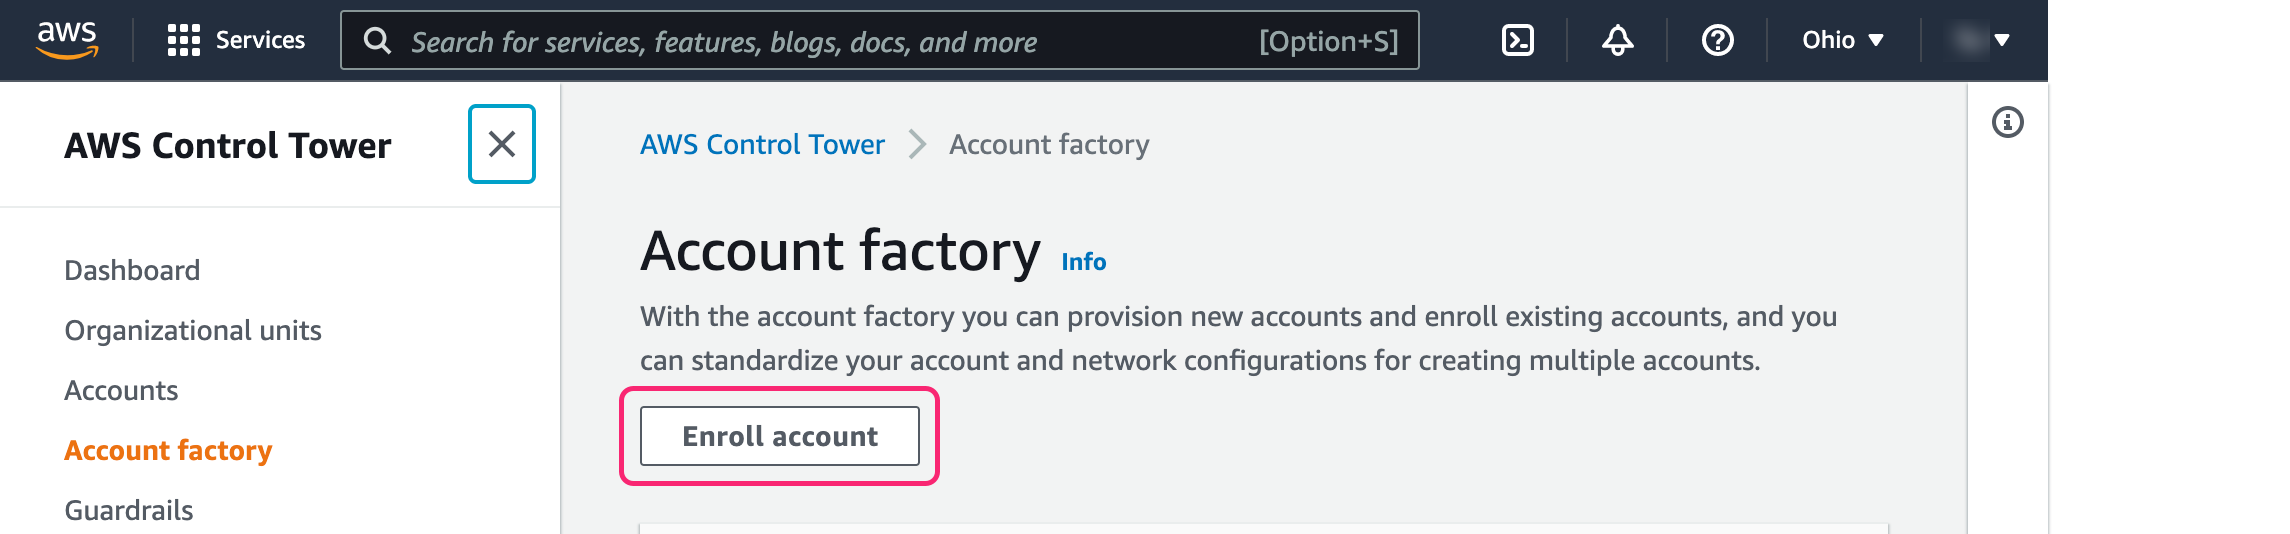 Enroll Account in AWS Account Factory